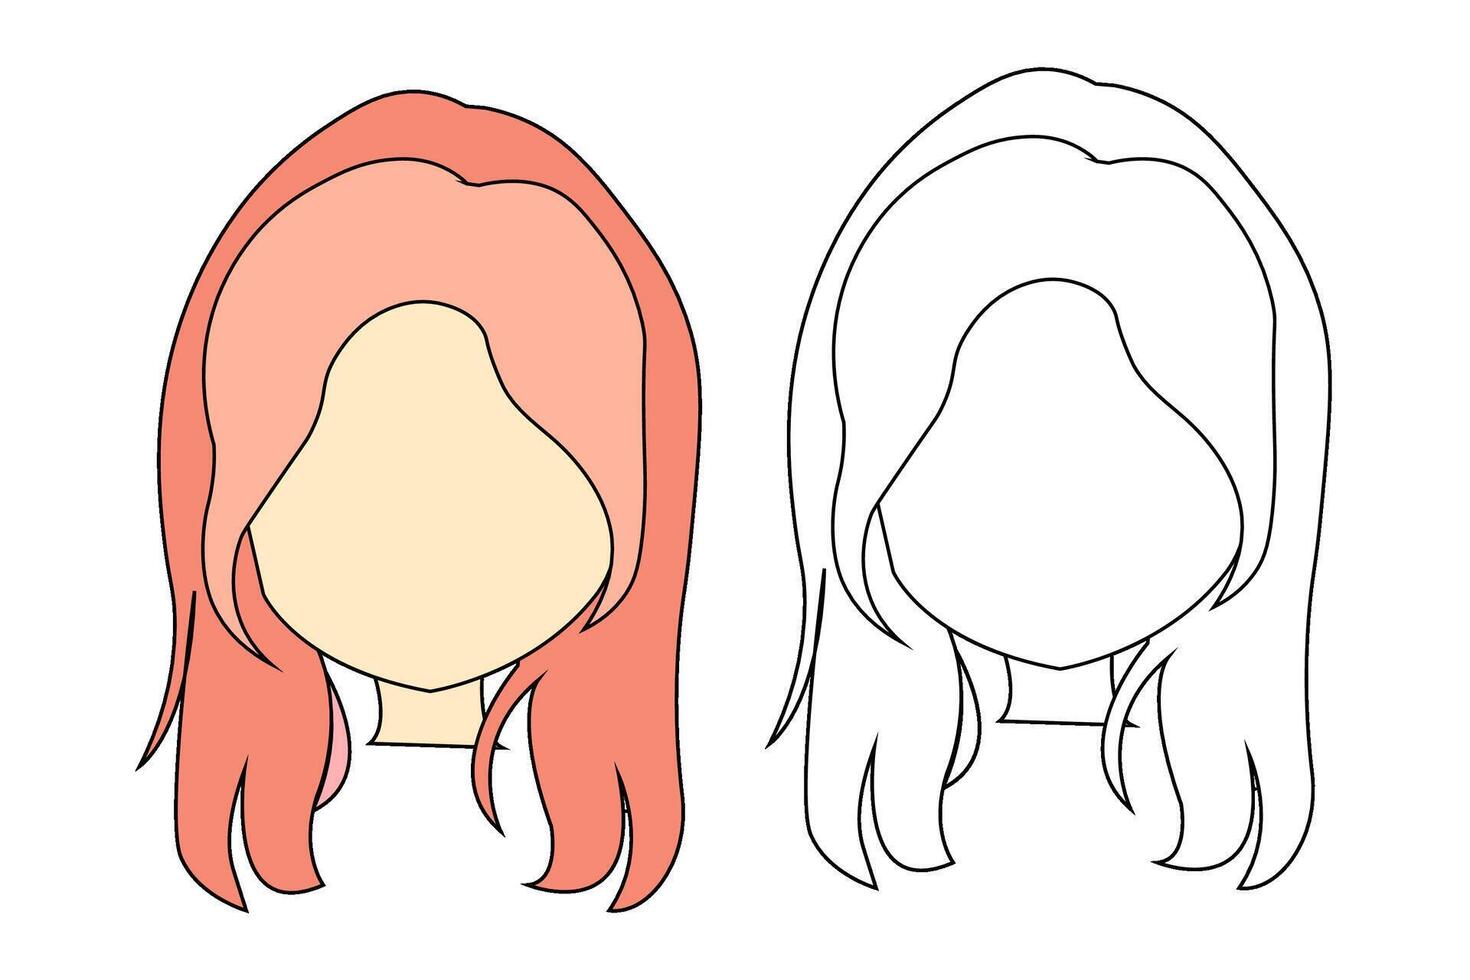 Curly girls characters avatars set. Young women face portraits in circles. vector